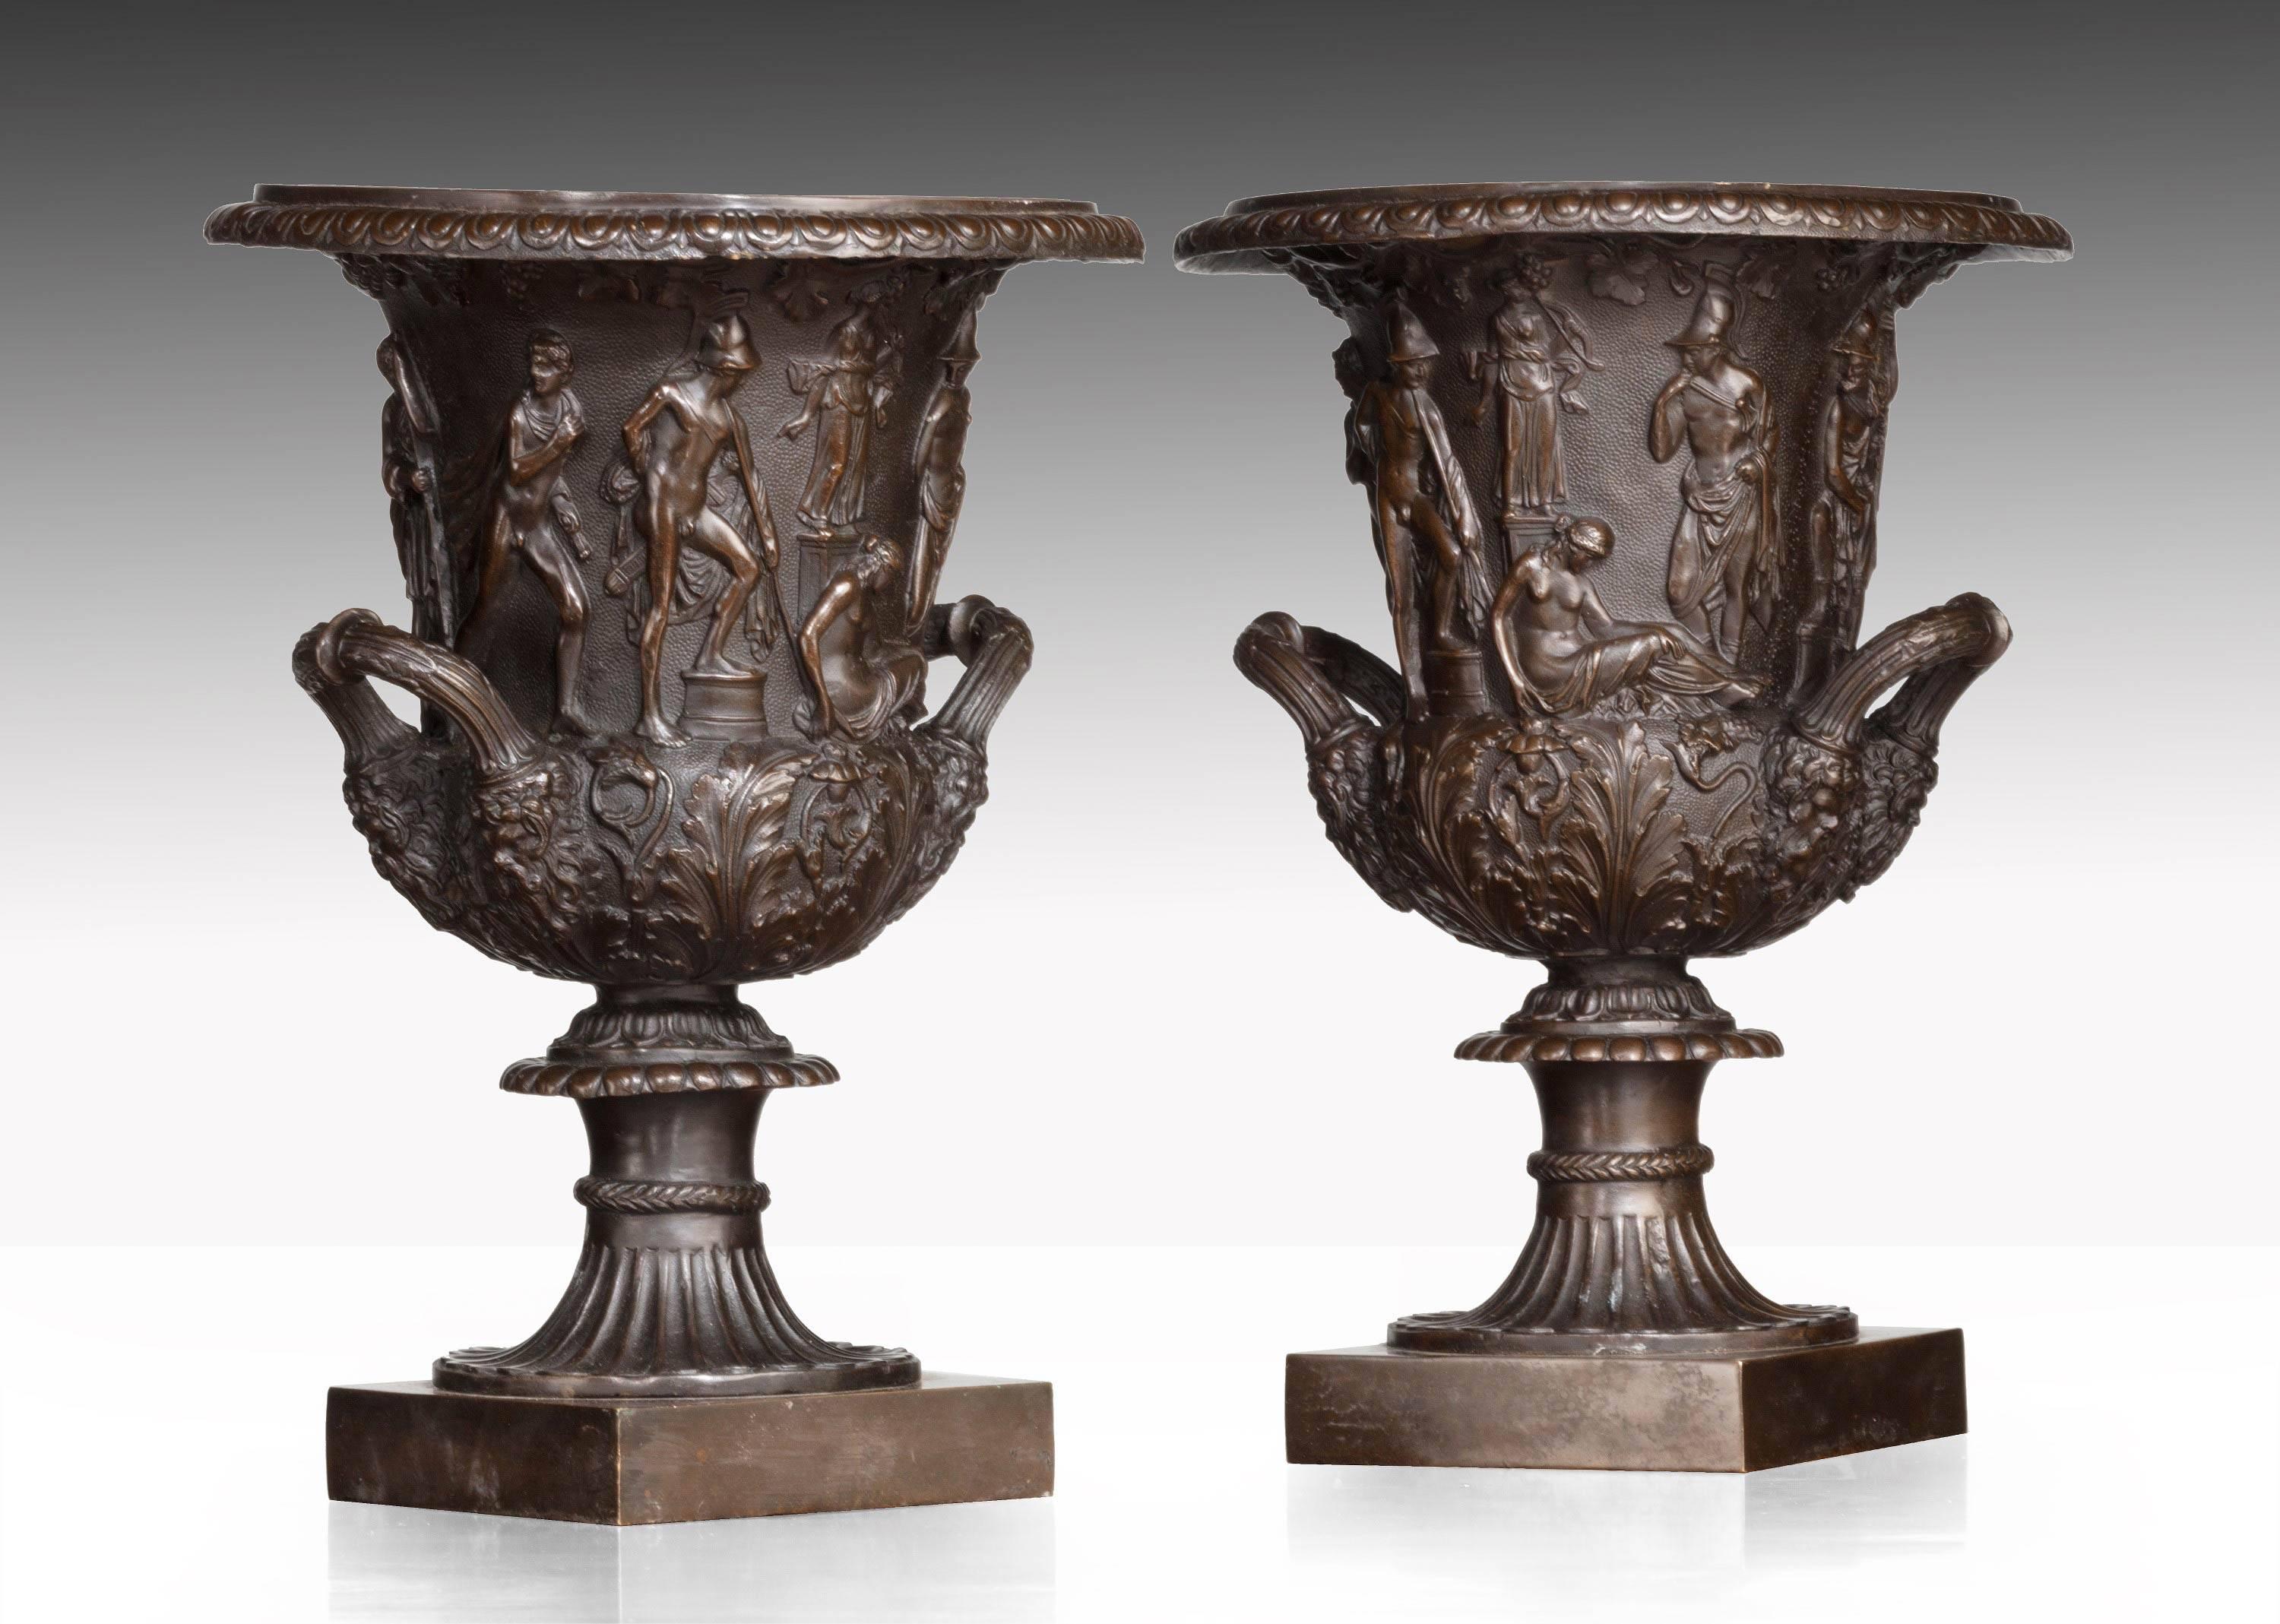 Pair of Early 20th Century Neoclassical Bronze Campana Shaped Urns In Good Condition For Sale In Peterborough, Northamptonshire